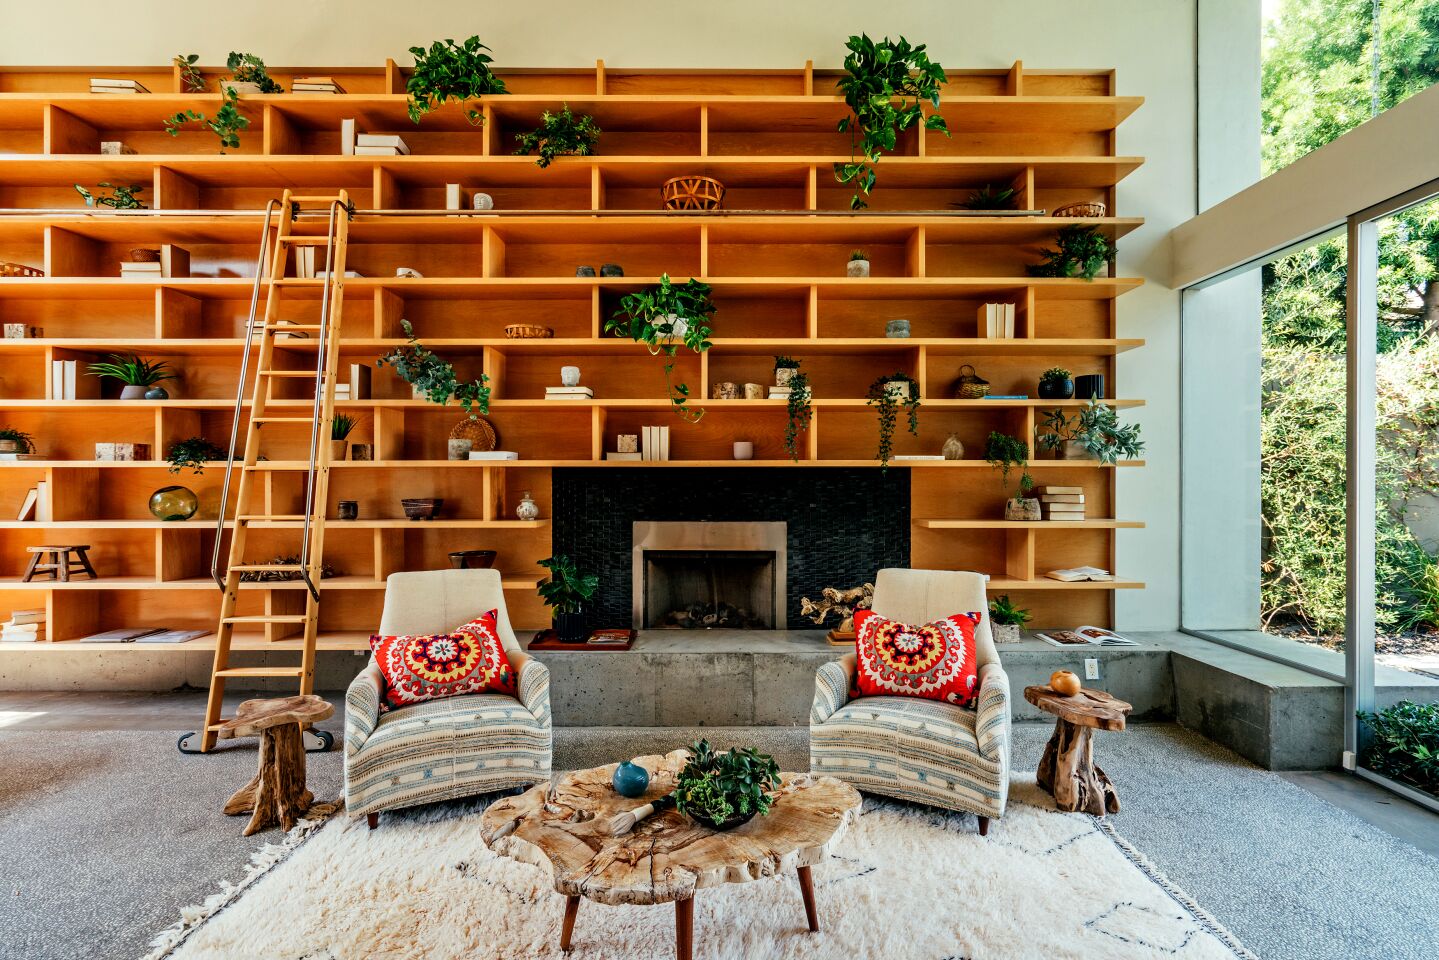 Tucked just off Abbot Kinney Boulevard, the home draws the eye with a dramatic wall of shelves navigated by a sliding ladder.